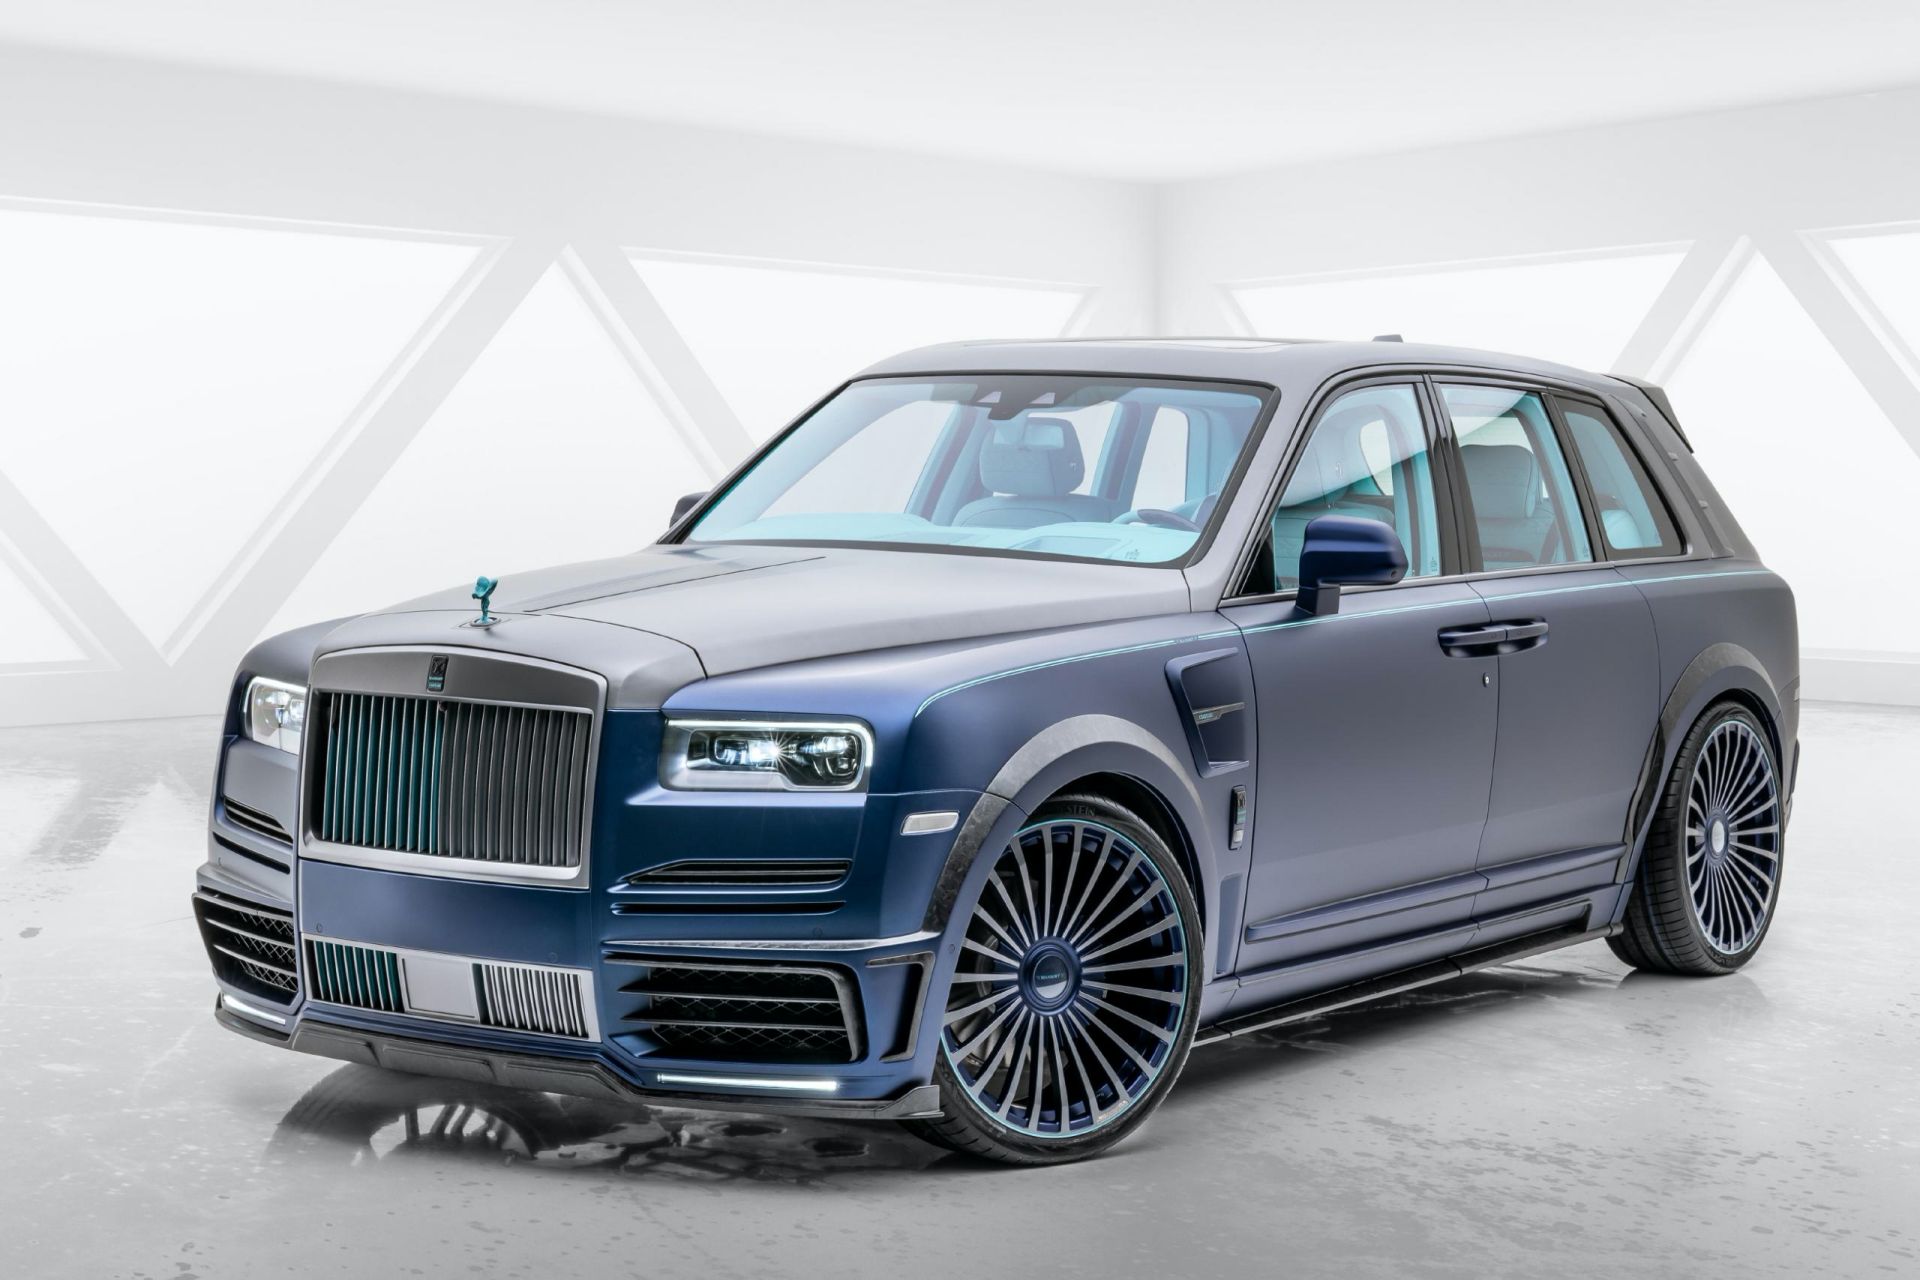 2021 Mansory RollsRoyce Cullinan  The King SUV is here  YouTube